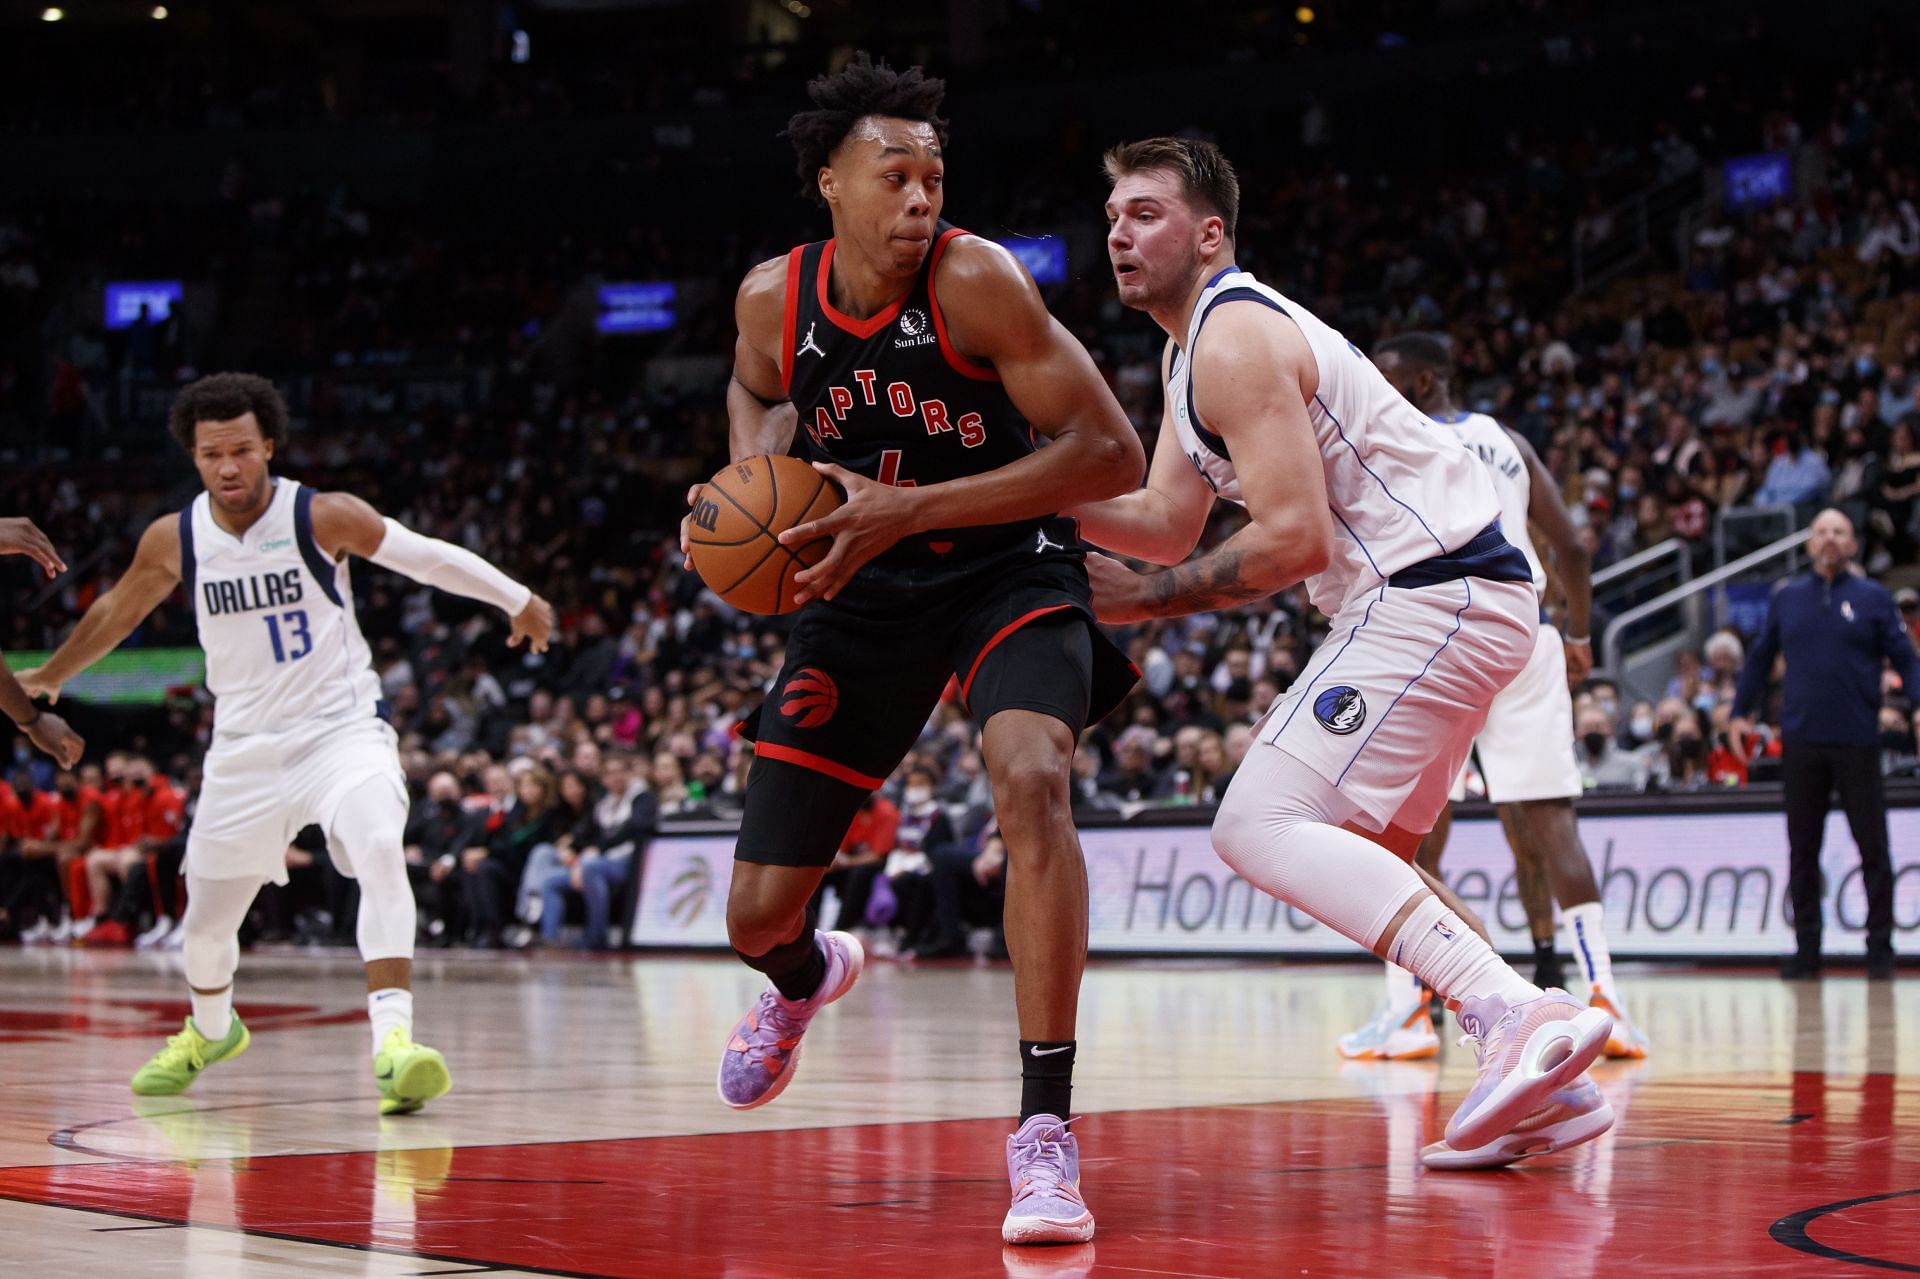 Scottie Barnes #4 of the Toronto Raptors drives against Luka Doncic #77 of the Dallas Mavericks during the second half of their NBA game at Scotiabank Arena on October 23, 2021 in Toronto, Canada.